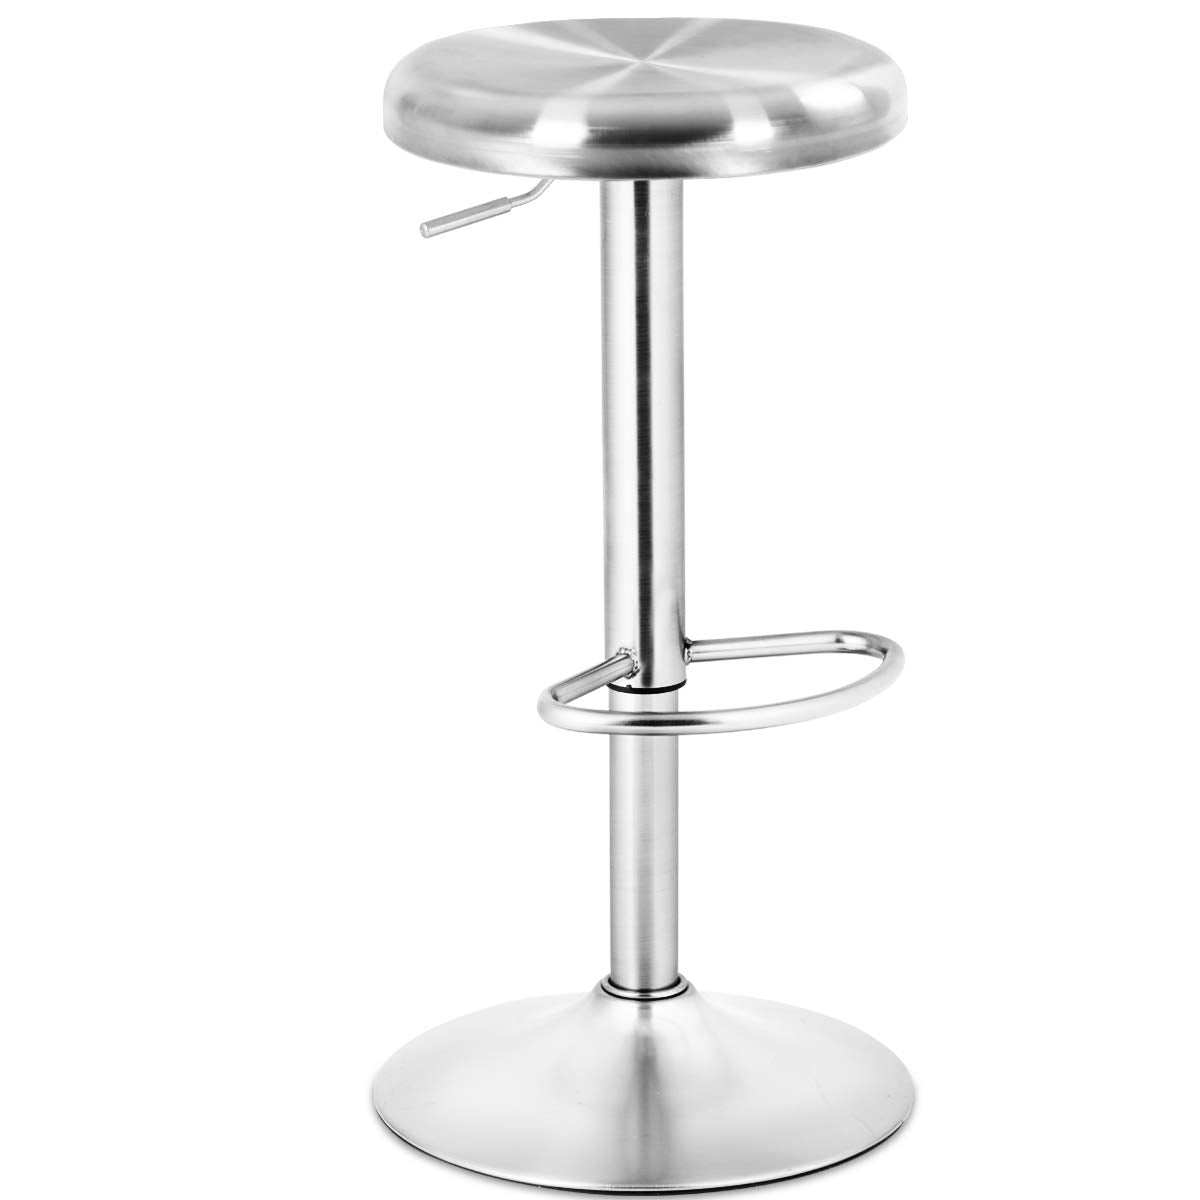 Modern Swivel Adjustable Height Barstool with Footrest, Stainless Steel Round Top Bar Height Barstools for Pub Bistro Kitchen Dining